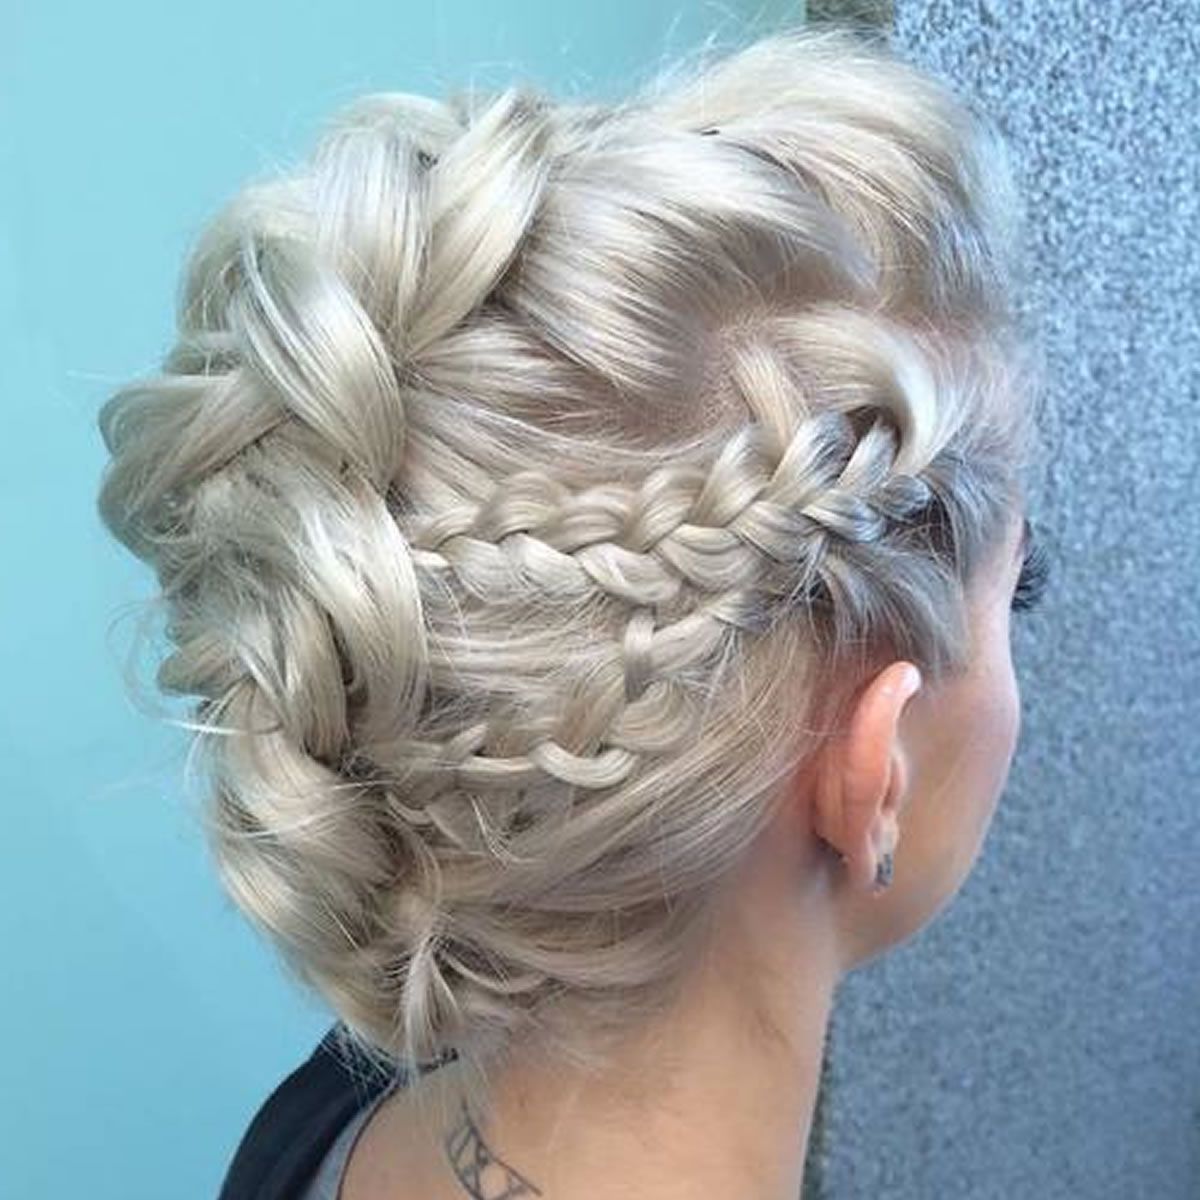 Current Cool Mohawk Updo Hairstyles Inside Platinum Blonde Braided Mohawk Updo – Hairstyles (View 11 of 20)